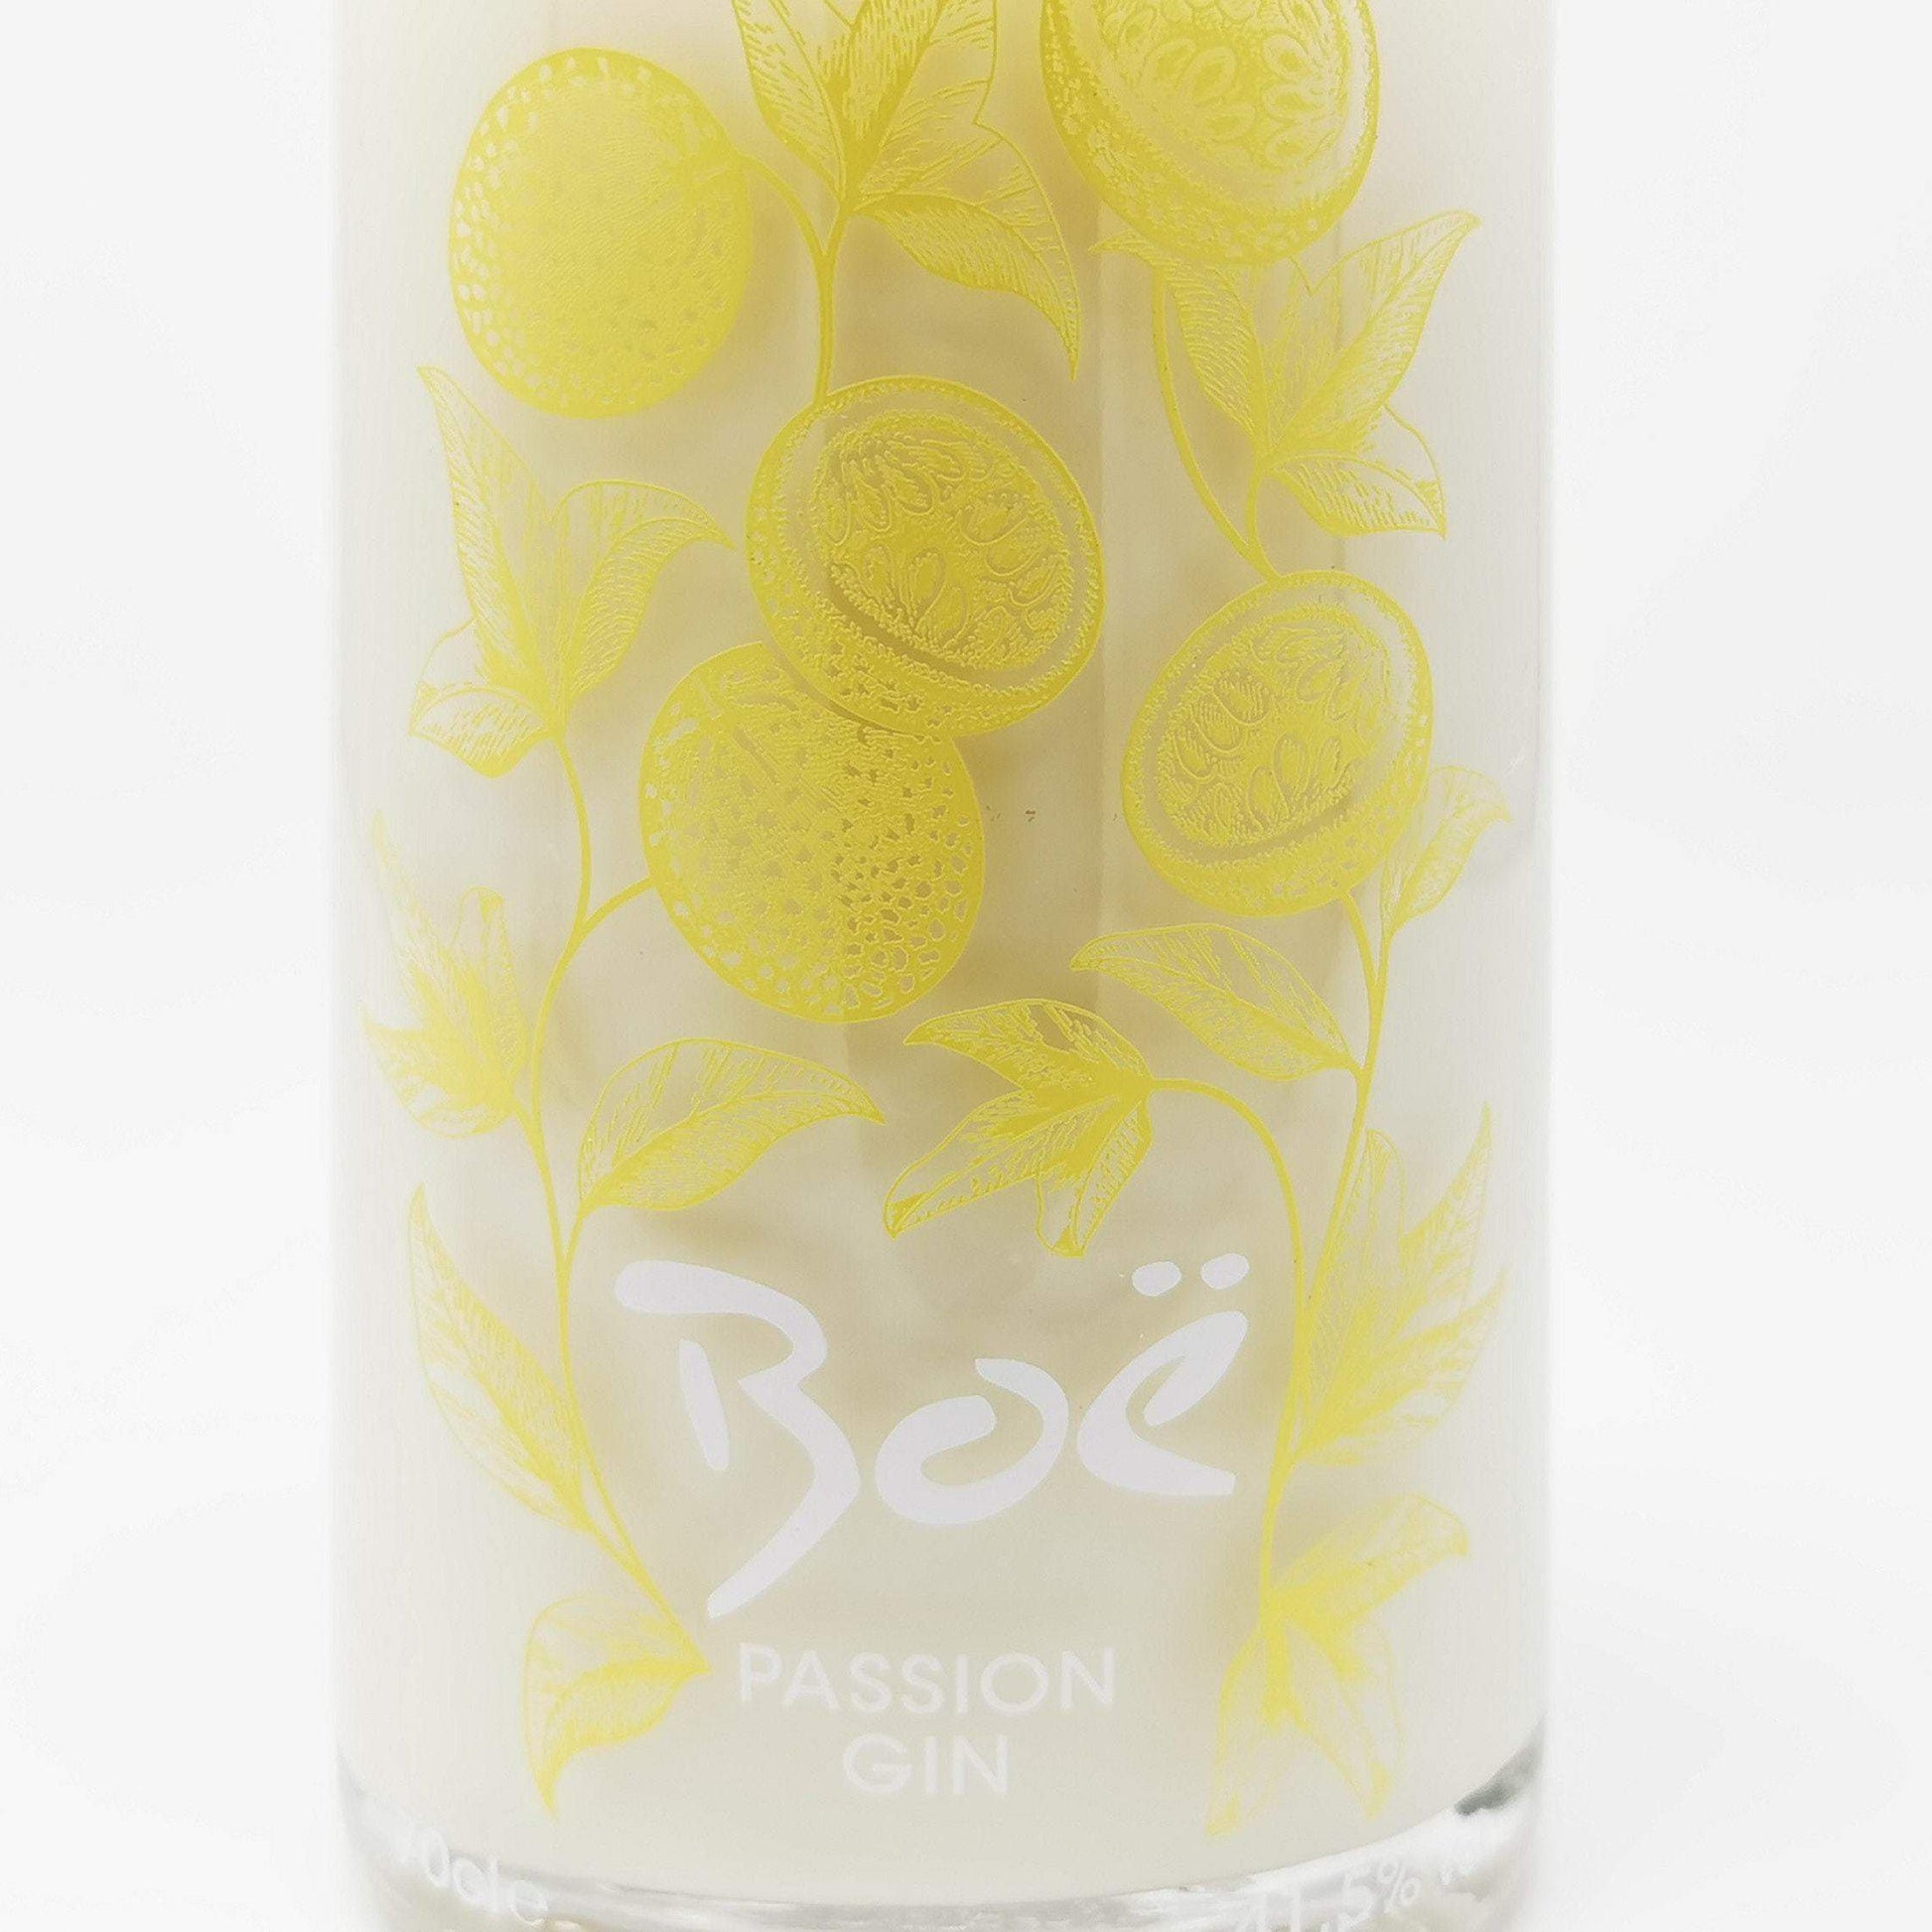 Boe Passion Gin Bottle Candle Gin Bottle Candles Adhock Homeware